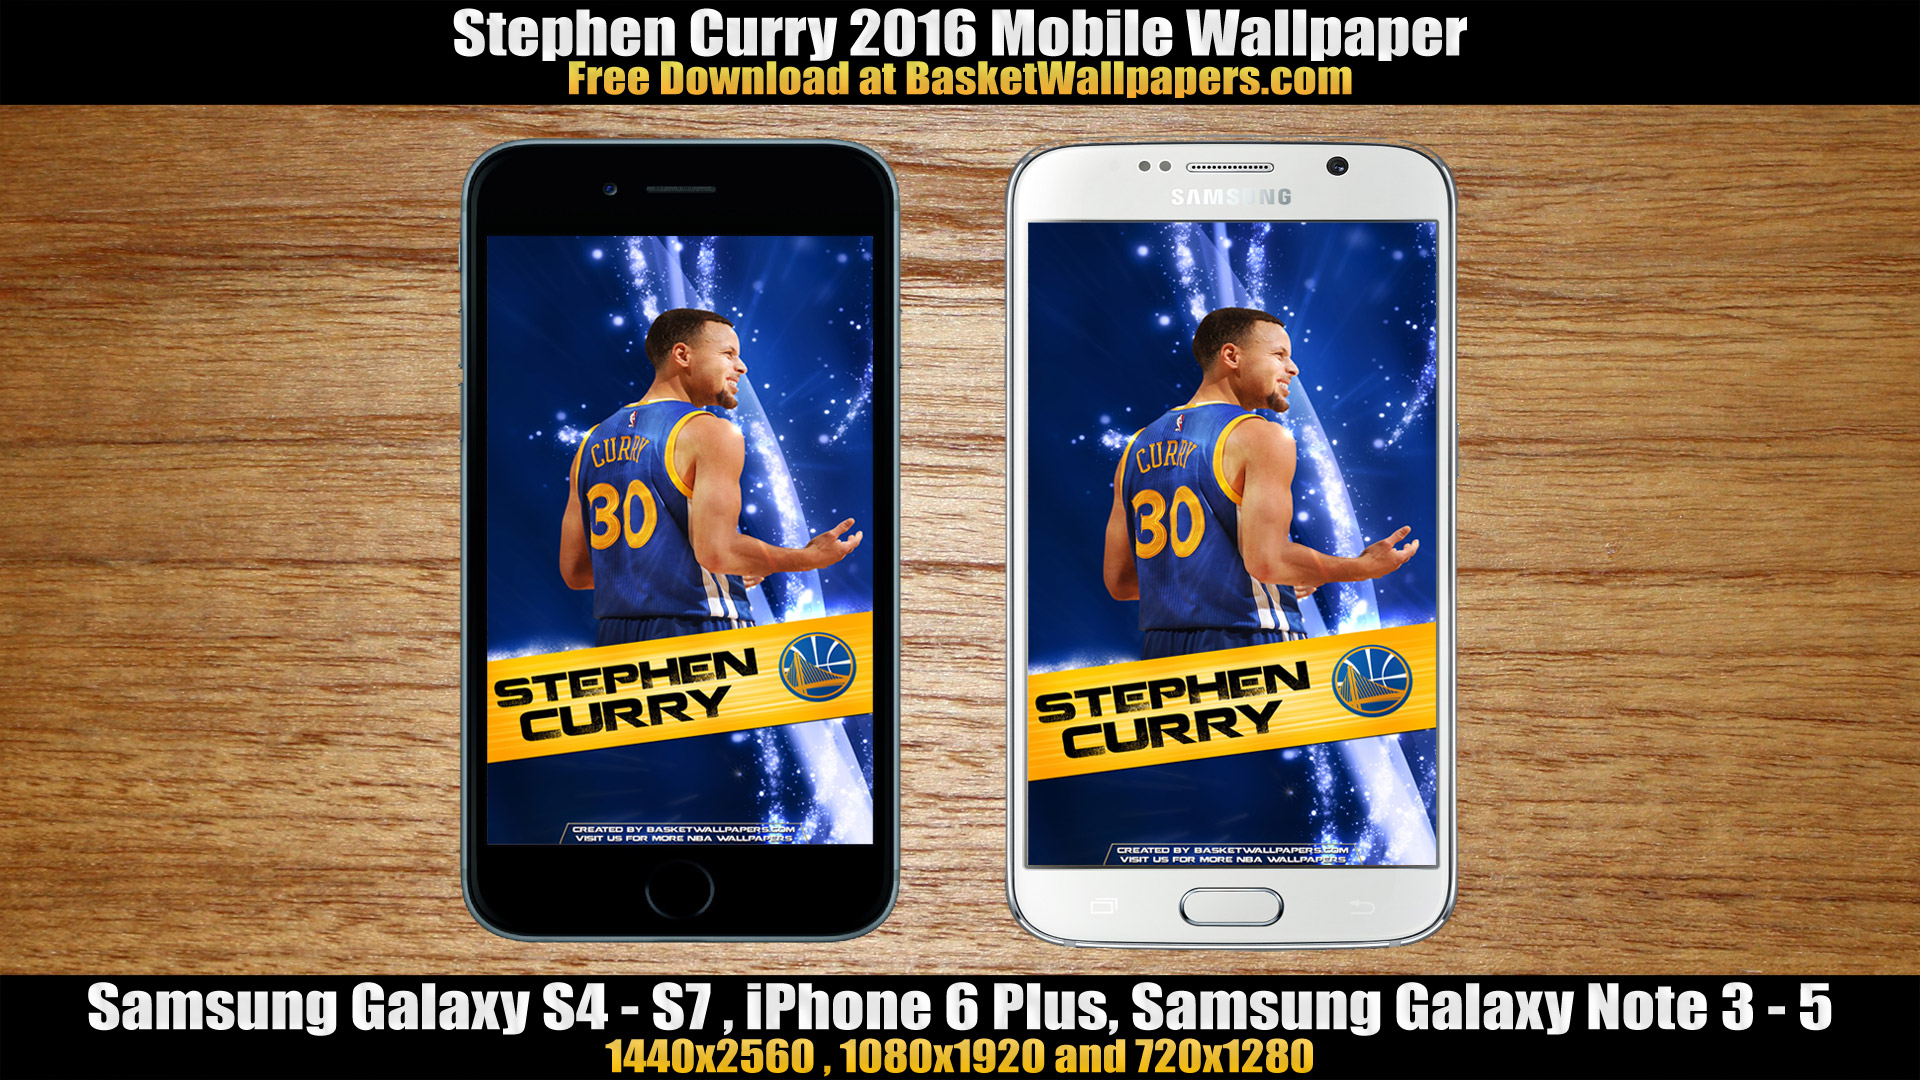 Stephen Curry Golden State Warriors 2016 Mobile Wallpaper | Basketball  Wallpapers at 